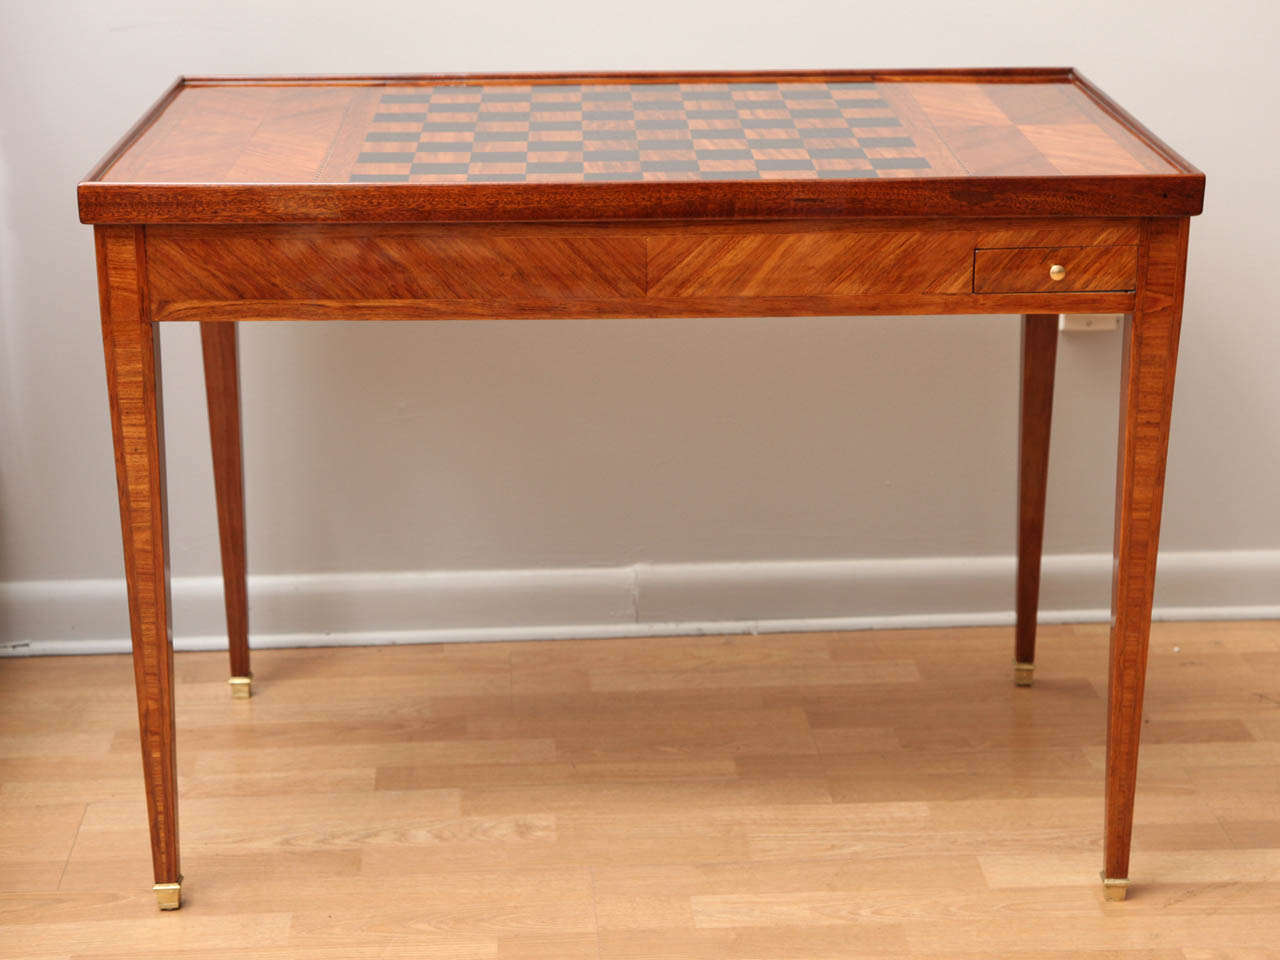 Fabulous Deco game table. Chess top flips over for cards or removed completely for backgammon.